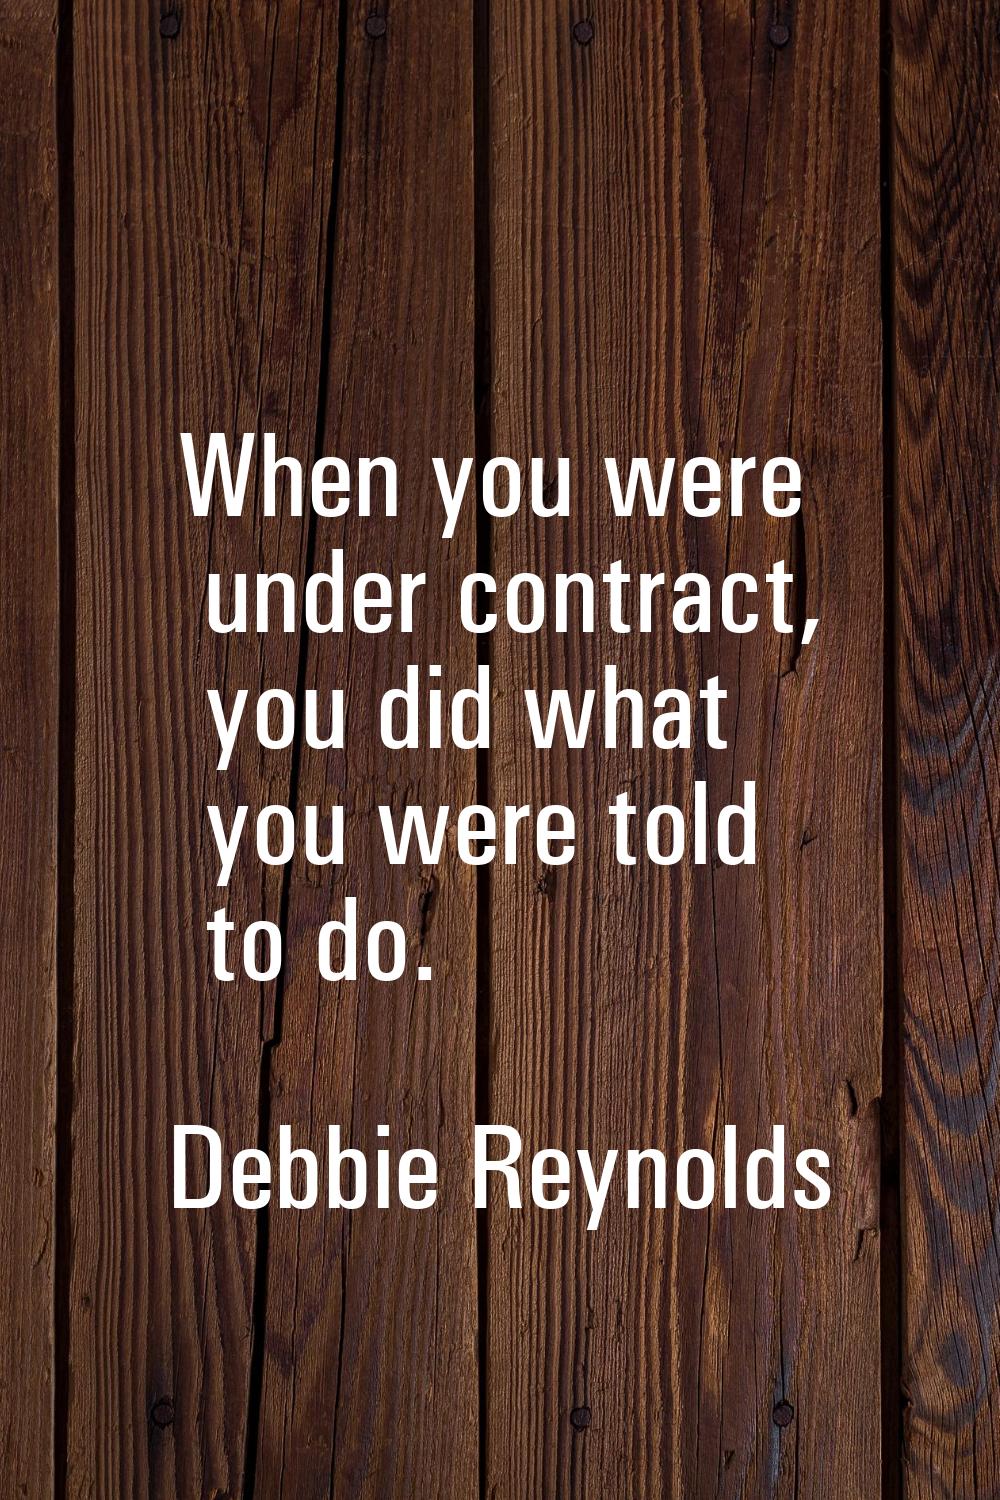 When you were under contract, you did what you were told to do.